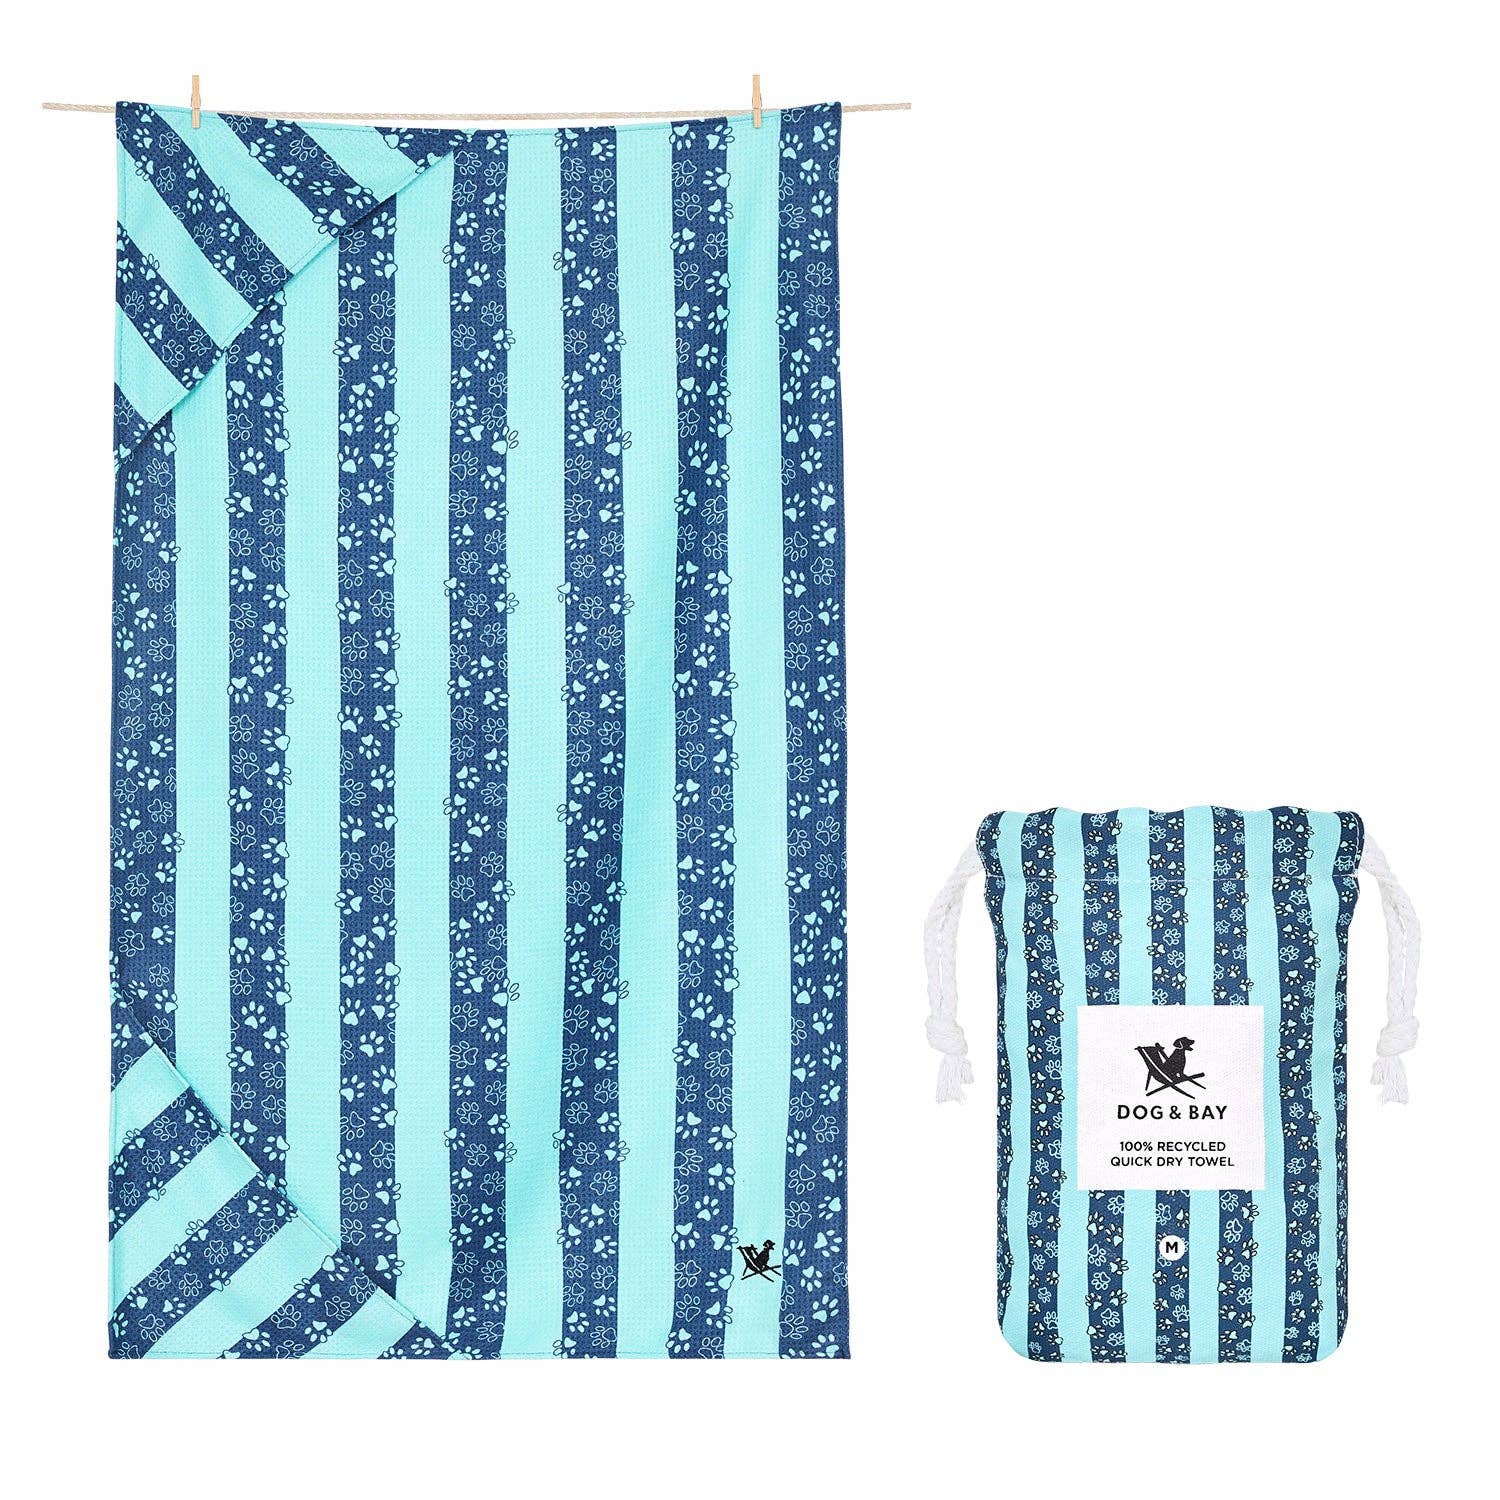 Quick Dry Dog Towel in Dog Days - 2 sizes - The Preppy Bunny